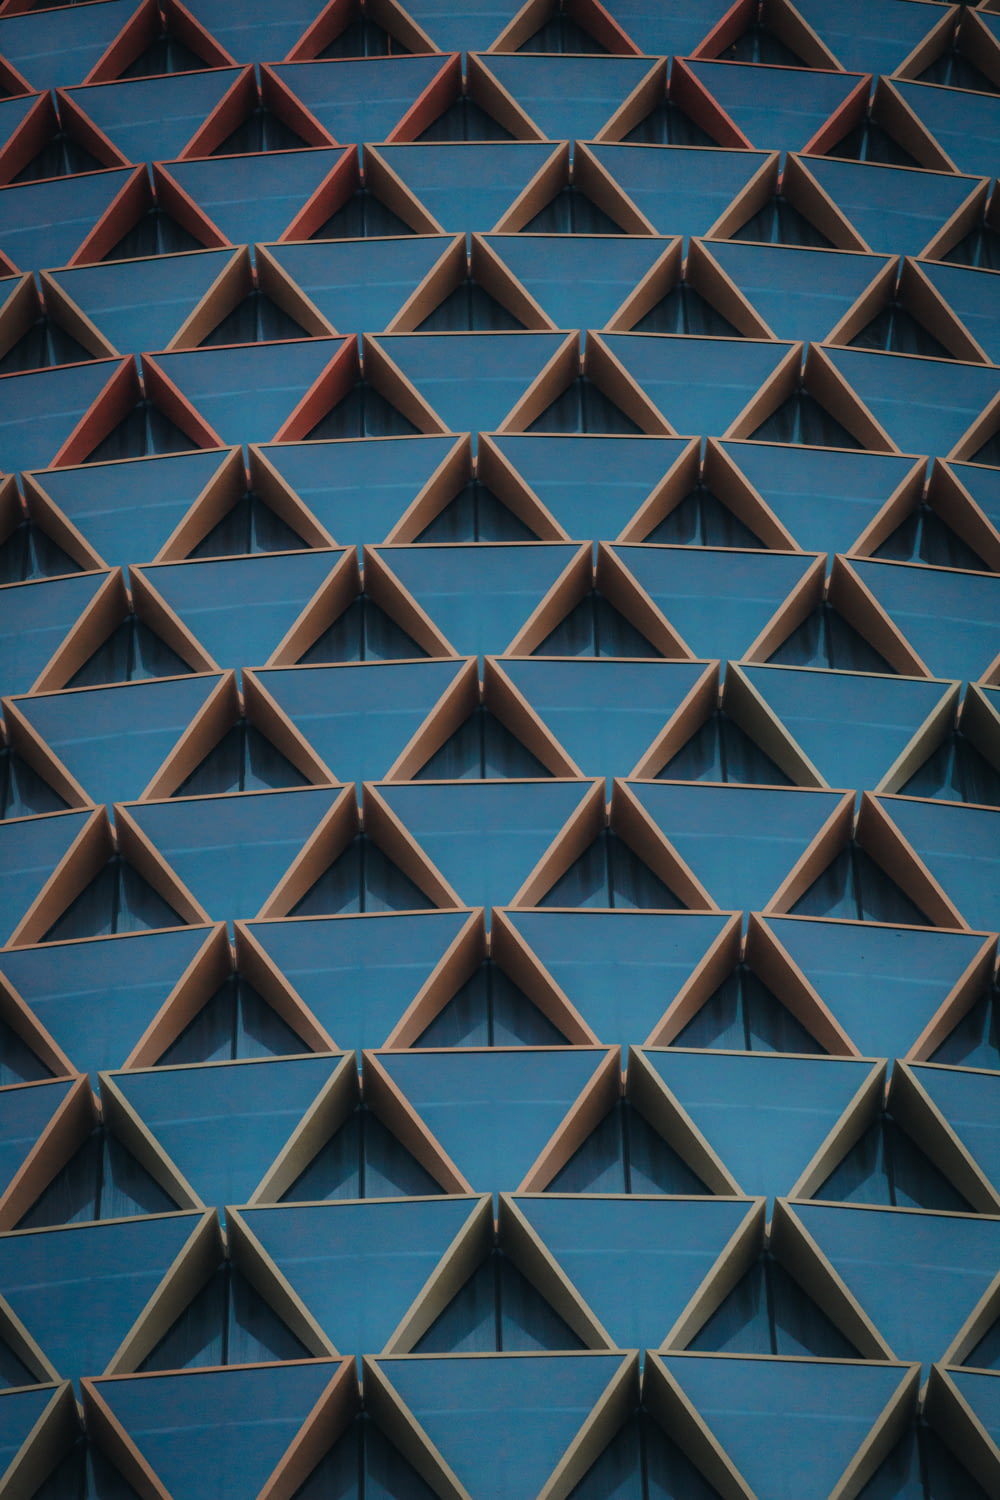 a close up of a building with many triangular shapes